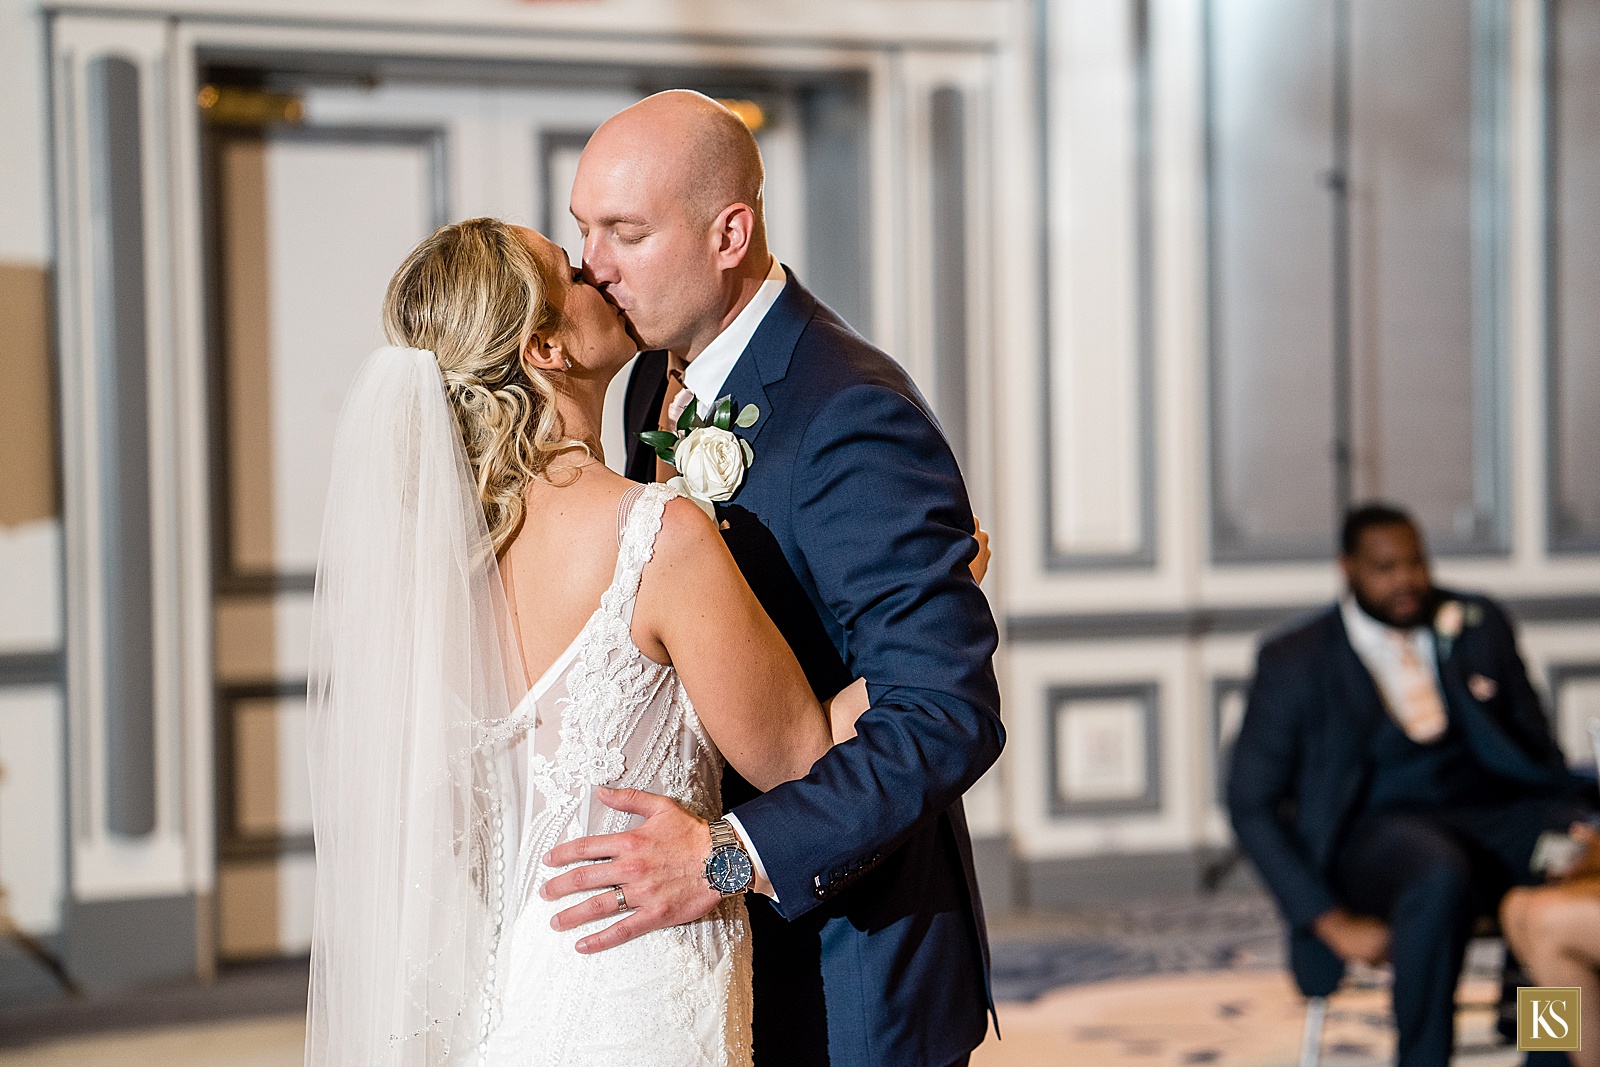 The Henry Hotel Wedding in Dearborn